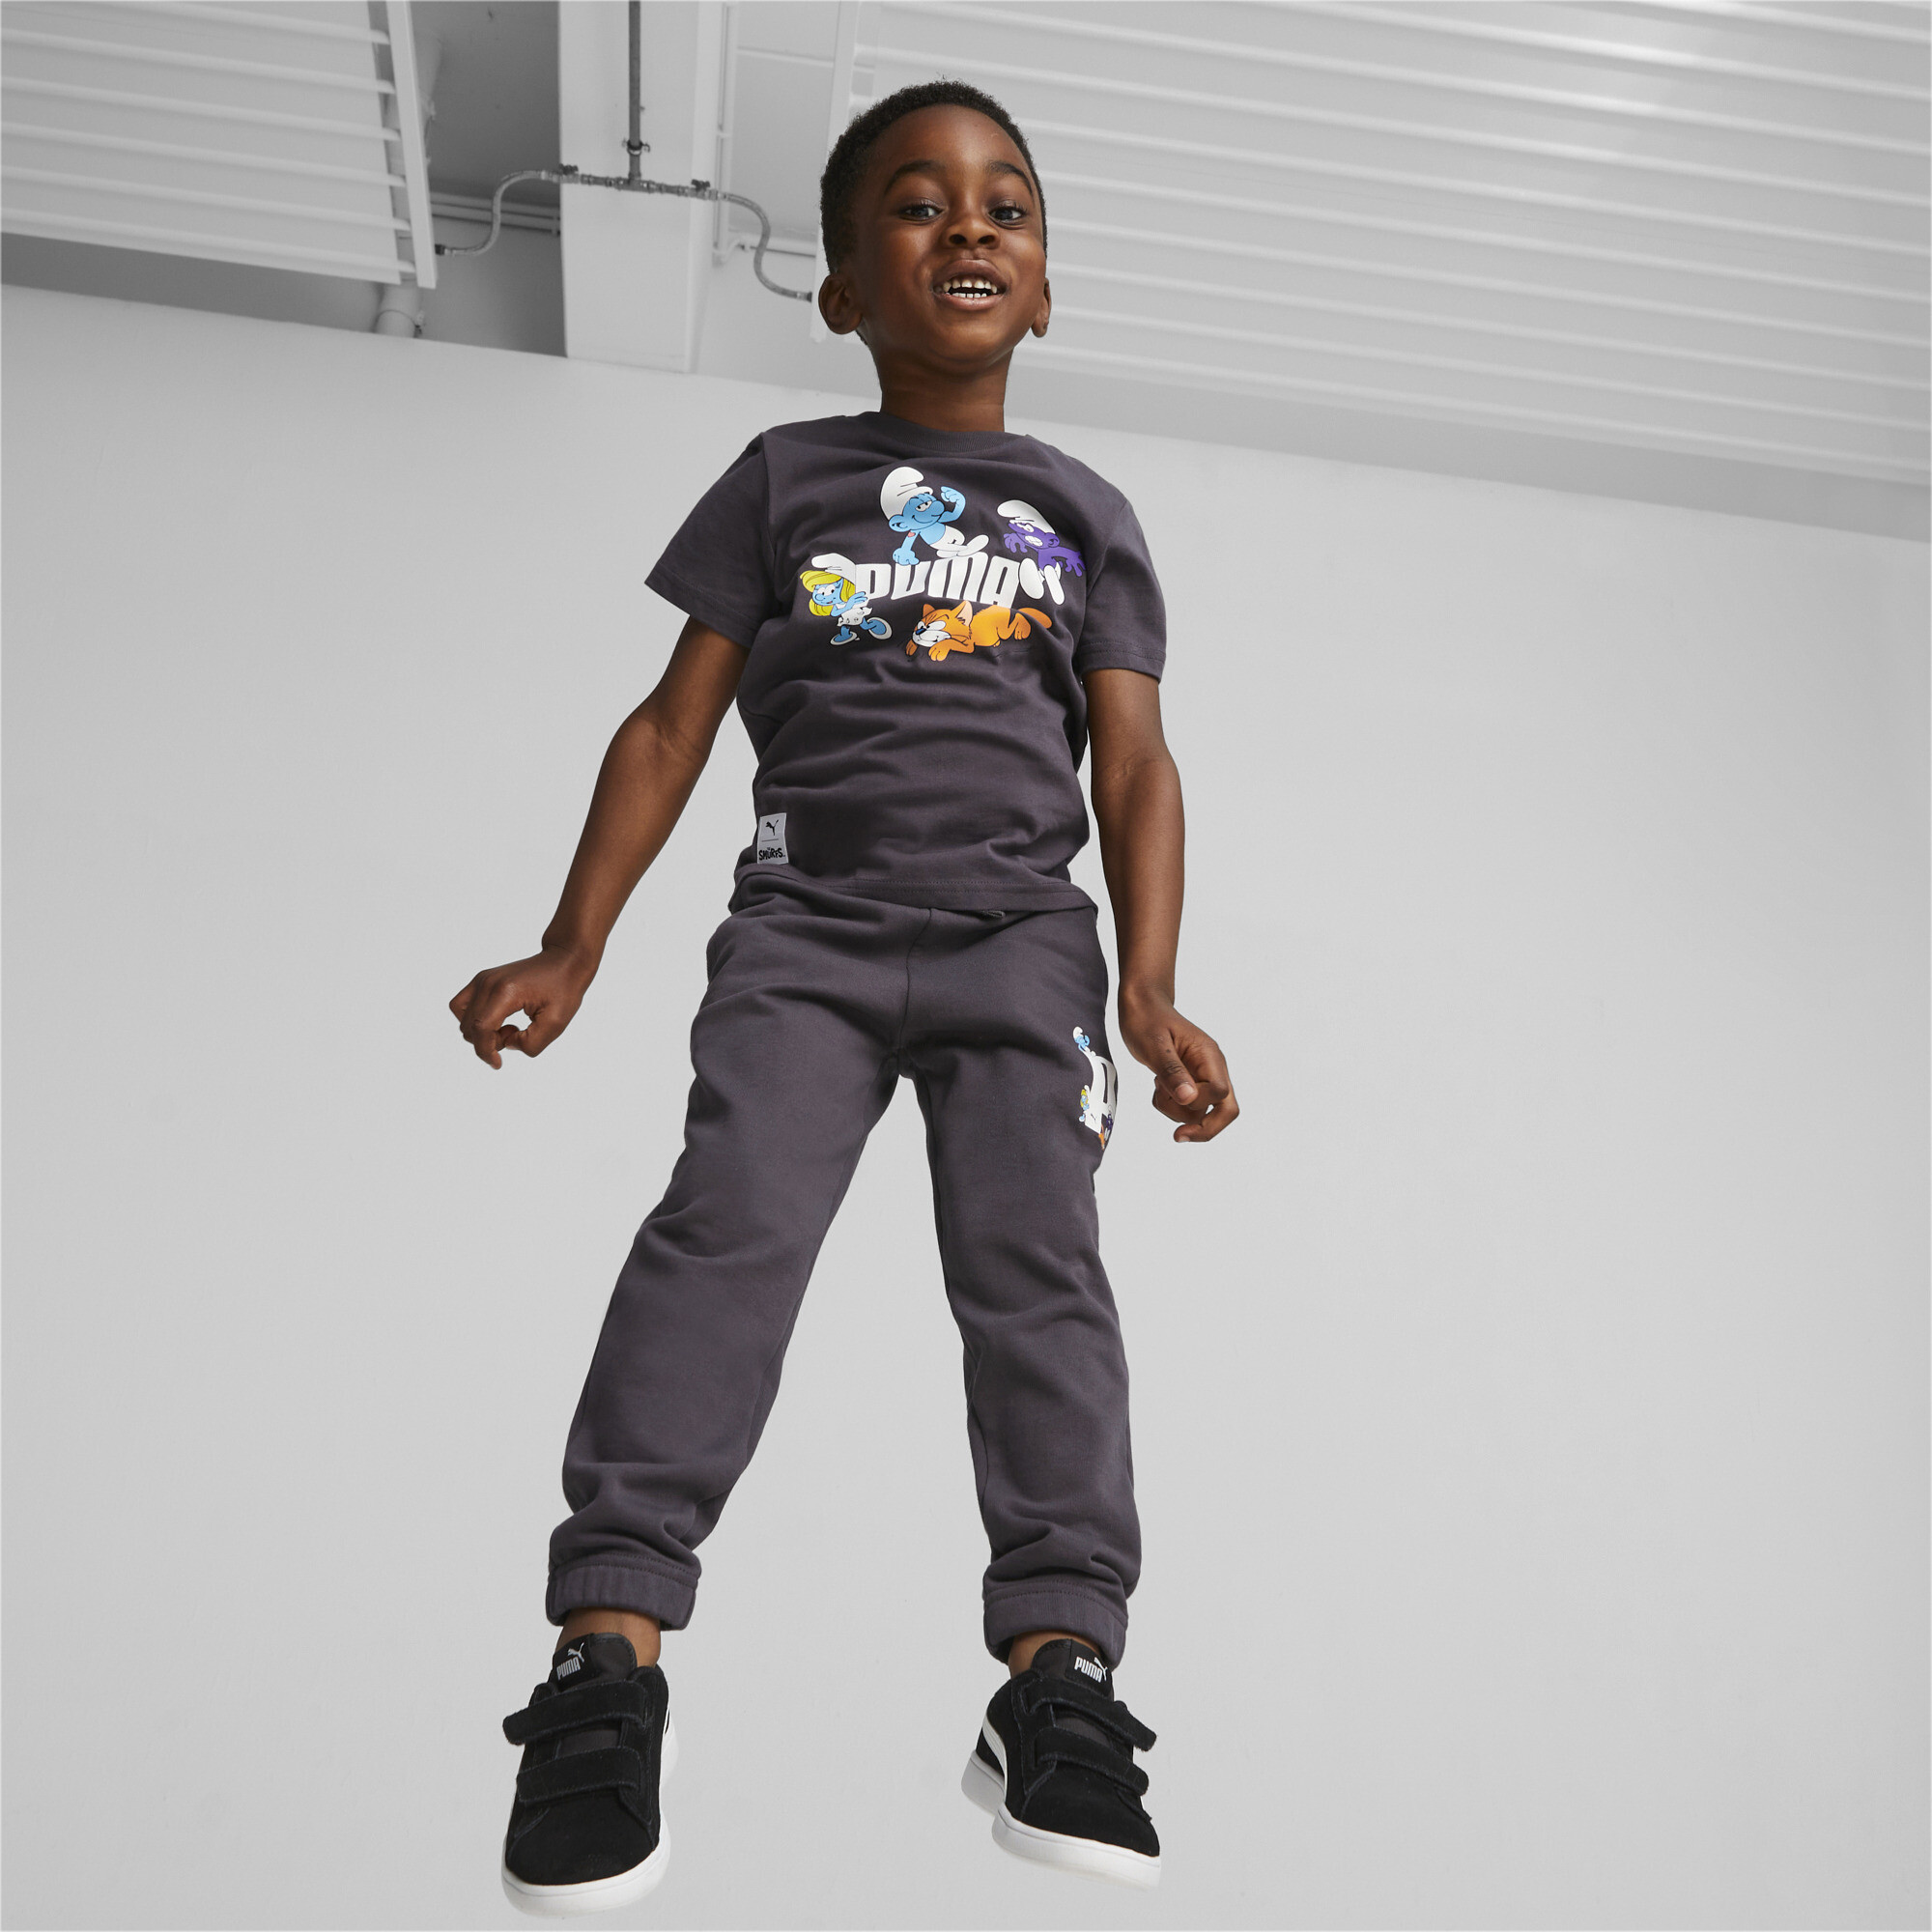 PUMA X THE SMURFS T-Shirt In Gray, Size 3-4 Youth